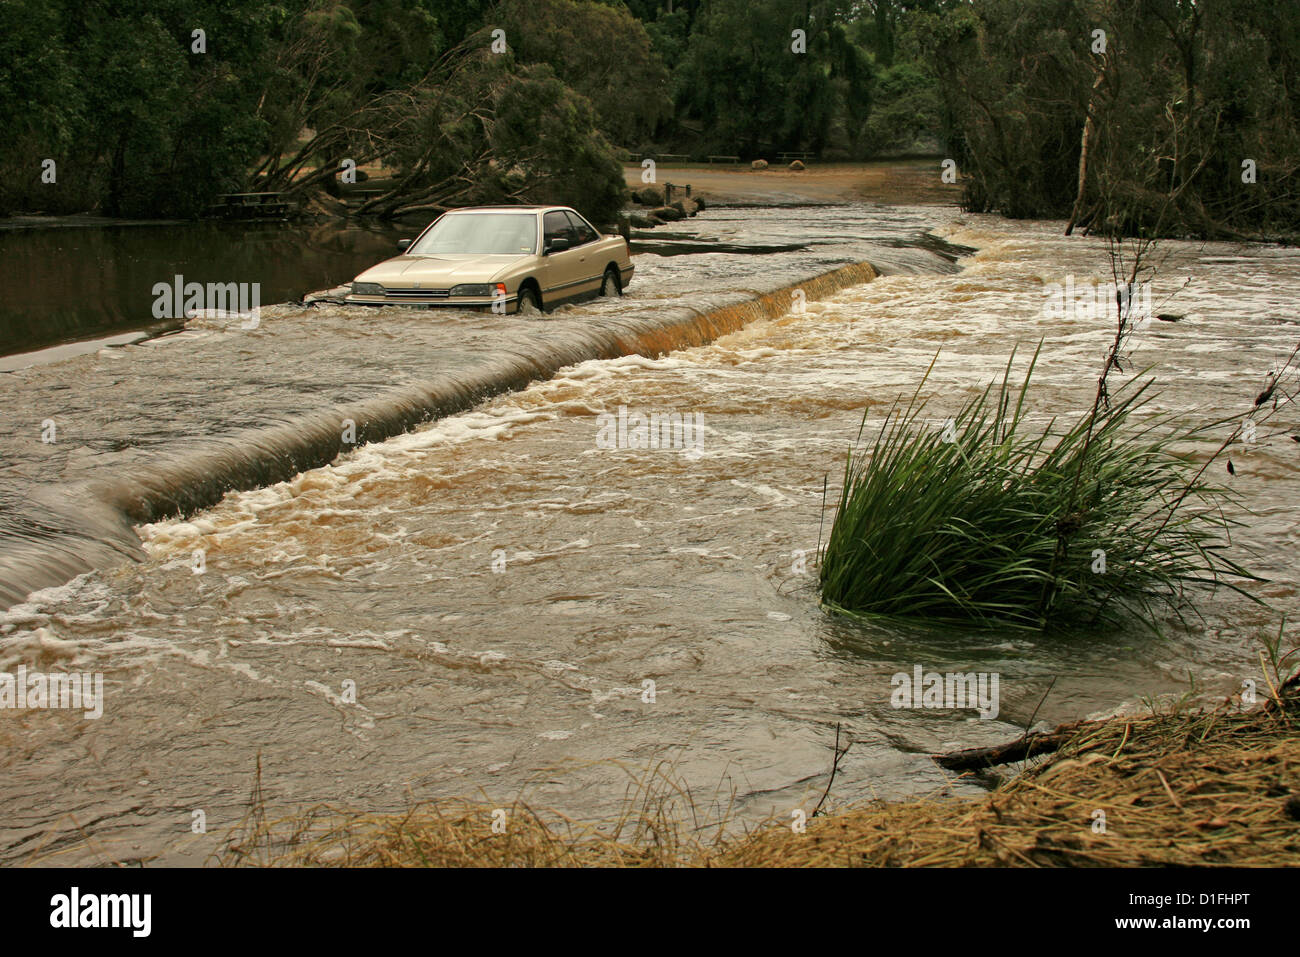 Car been driven through dangerously deep and fast flowing floodwaters of rivercrossing a road in Australia Stock Photo